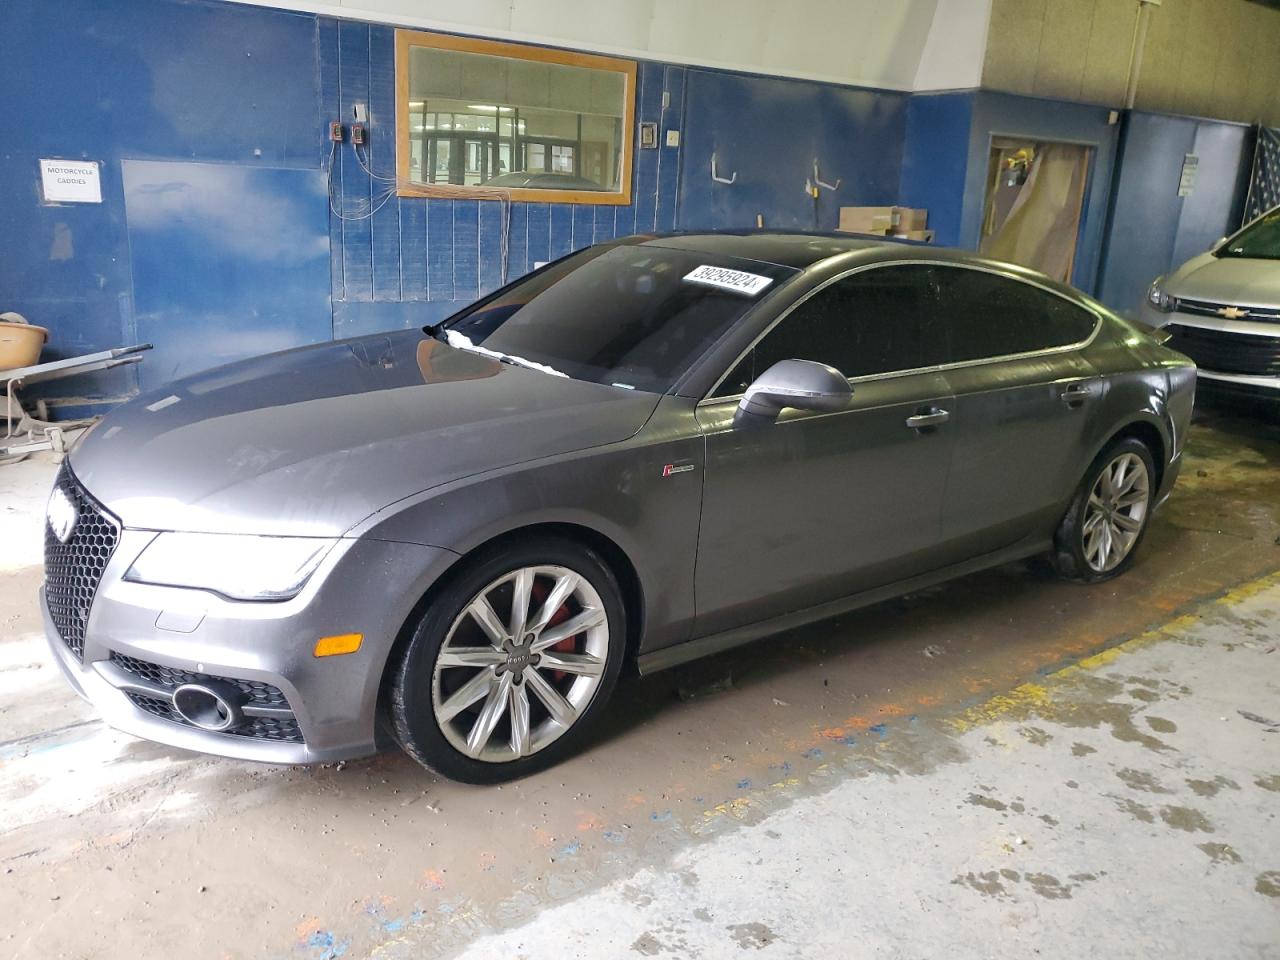 vin: WAU2GAFC0CN095742 WAU2GAFC0CN095742 2012 audi a7 3000 for Sale in 46254 2452, In - Indianapolis, Indianapolis, USA